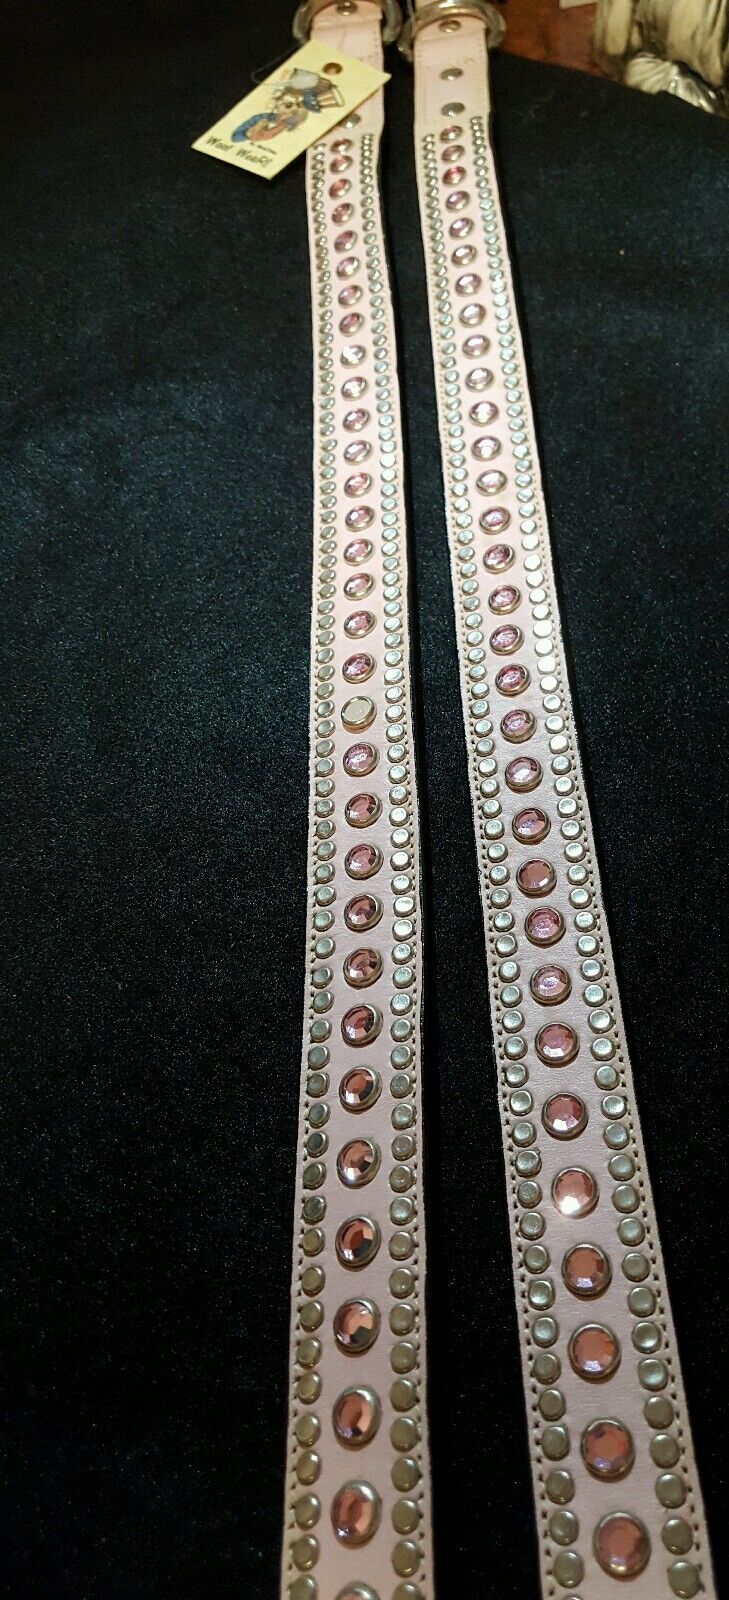 PINK LEATHER DOG COLLAR, WITH PINK SWAROVSKI CRYSTALS & STUDS THRU OUT, MADE IN 